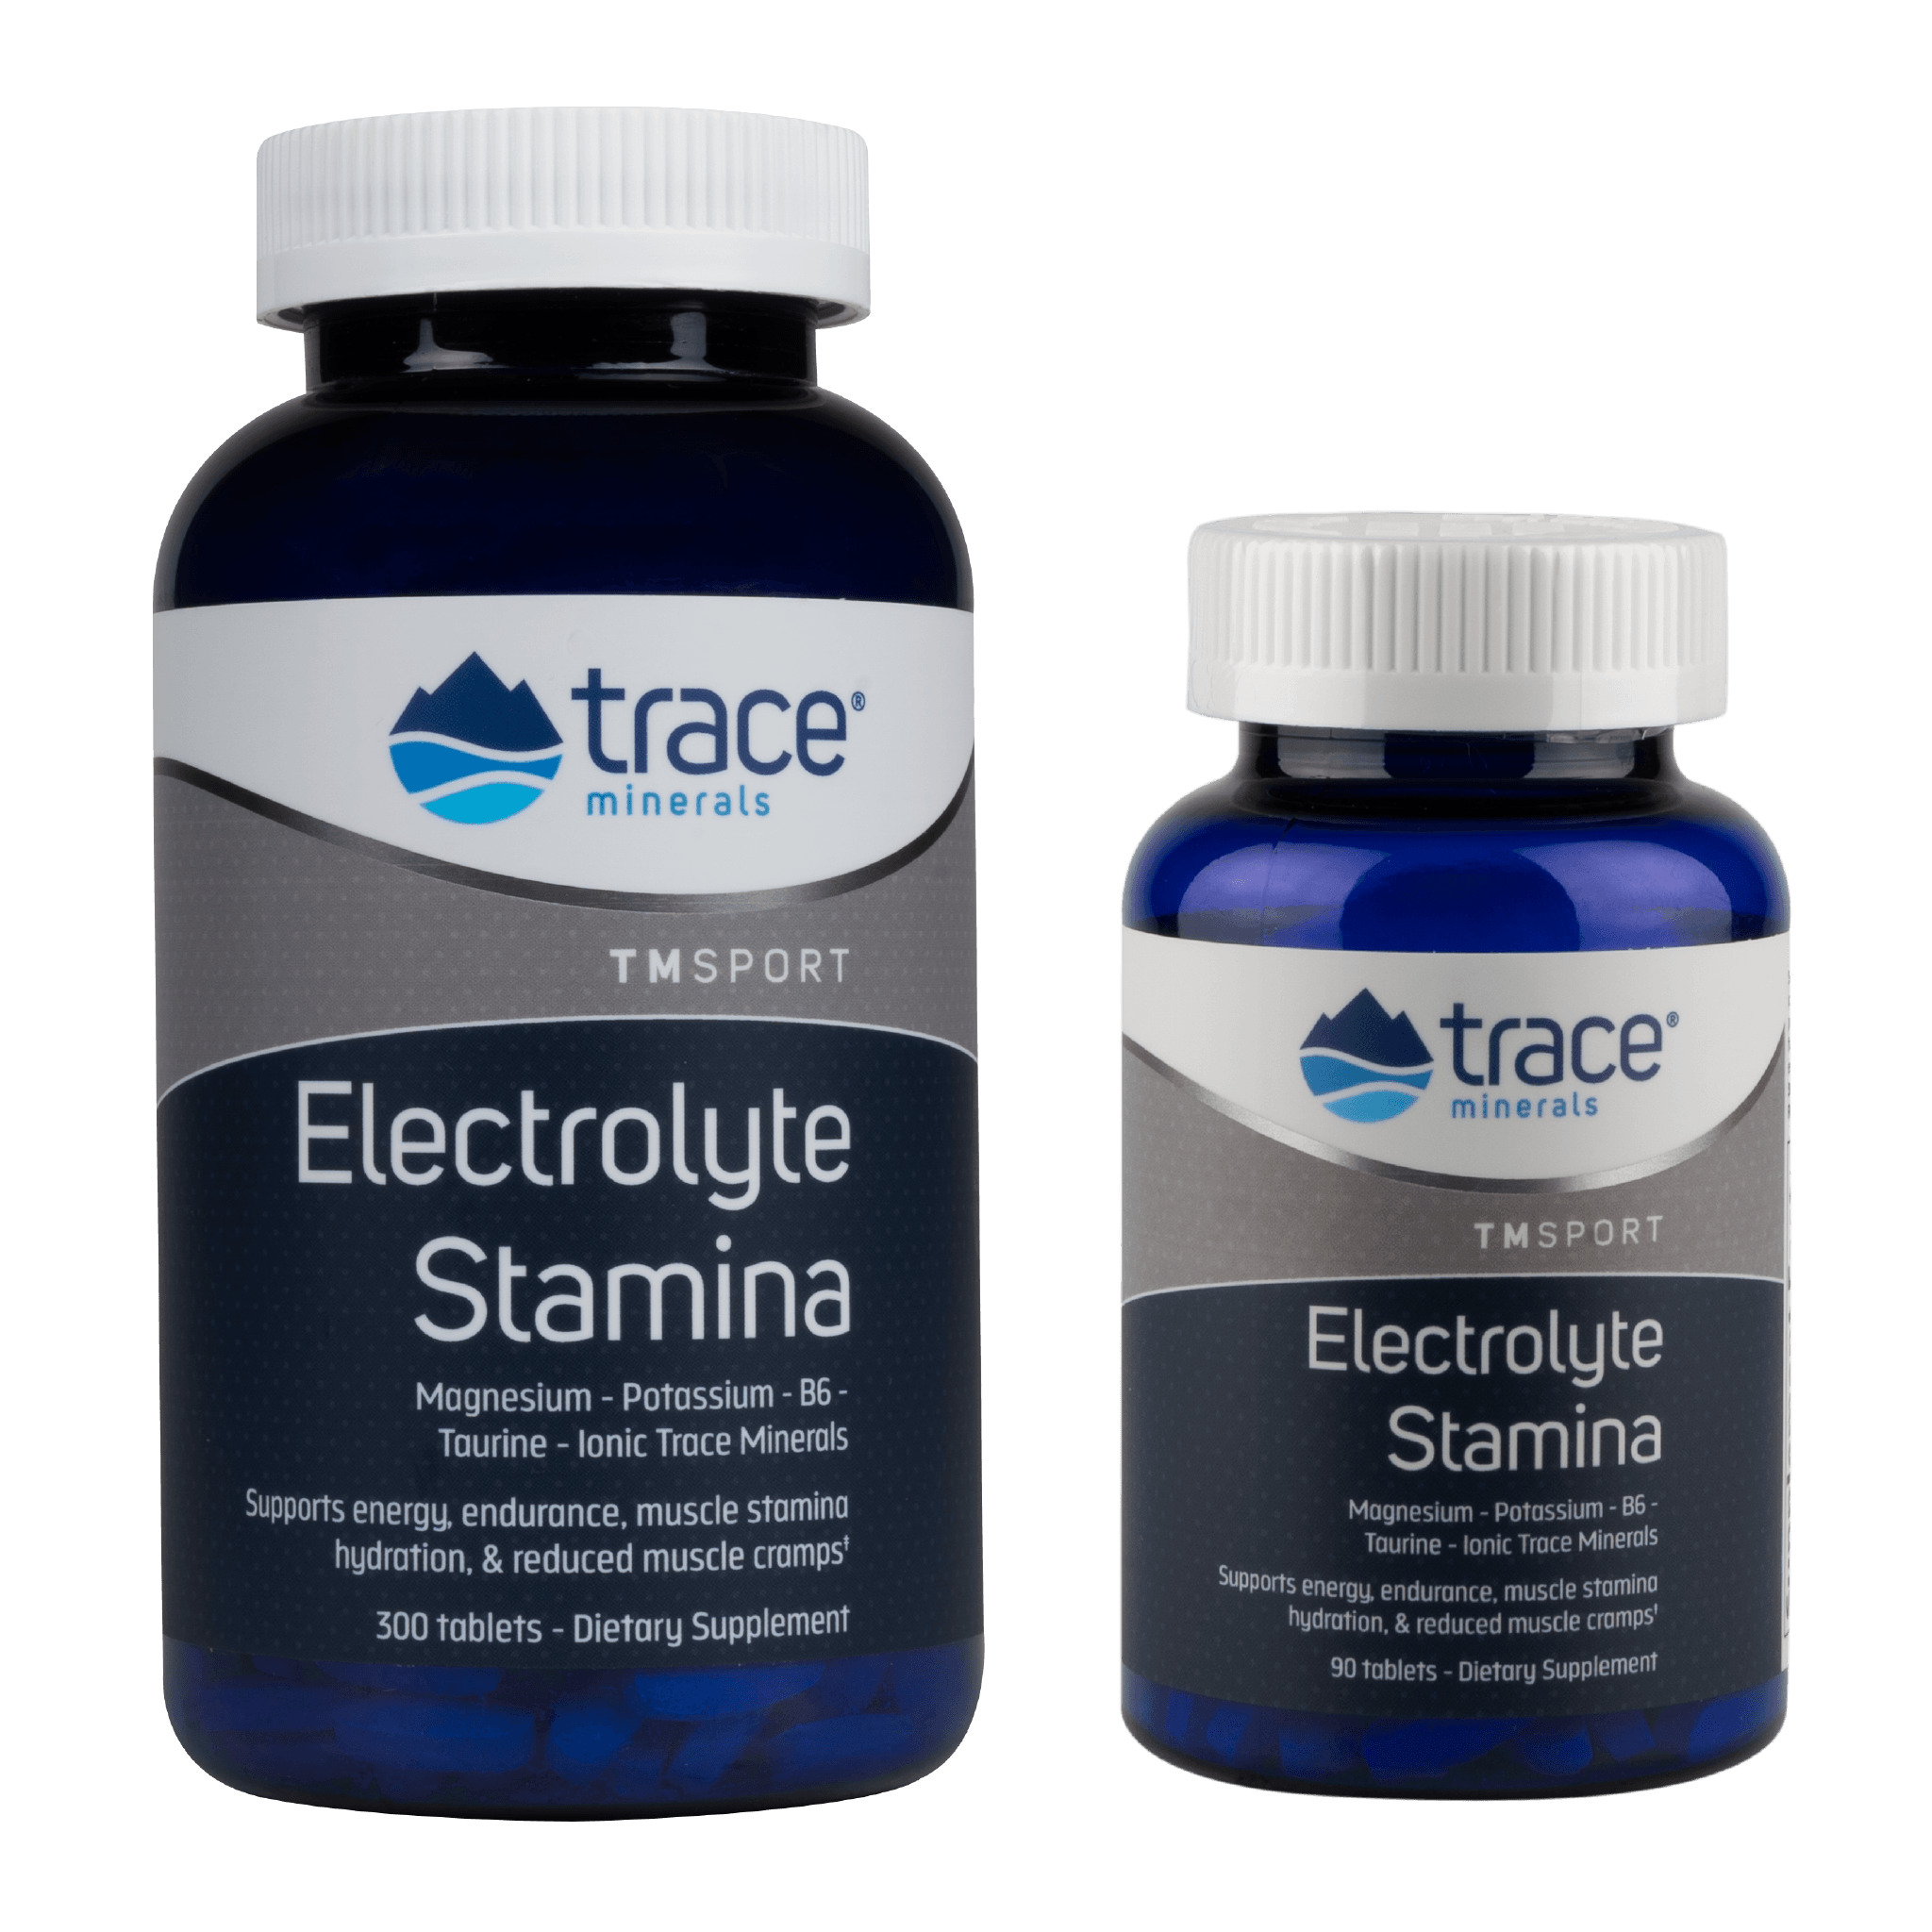 Electrolyte Stamina Tablets - Trace Minerals